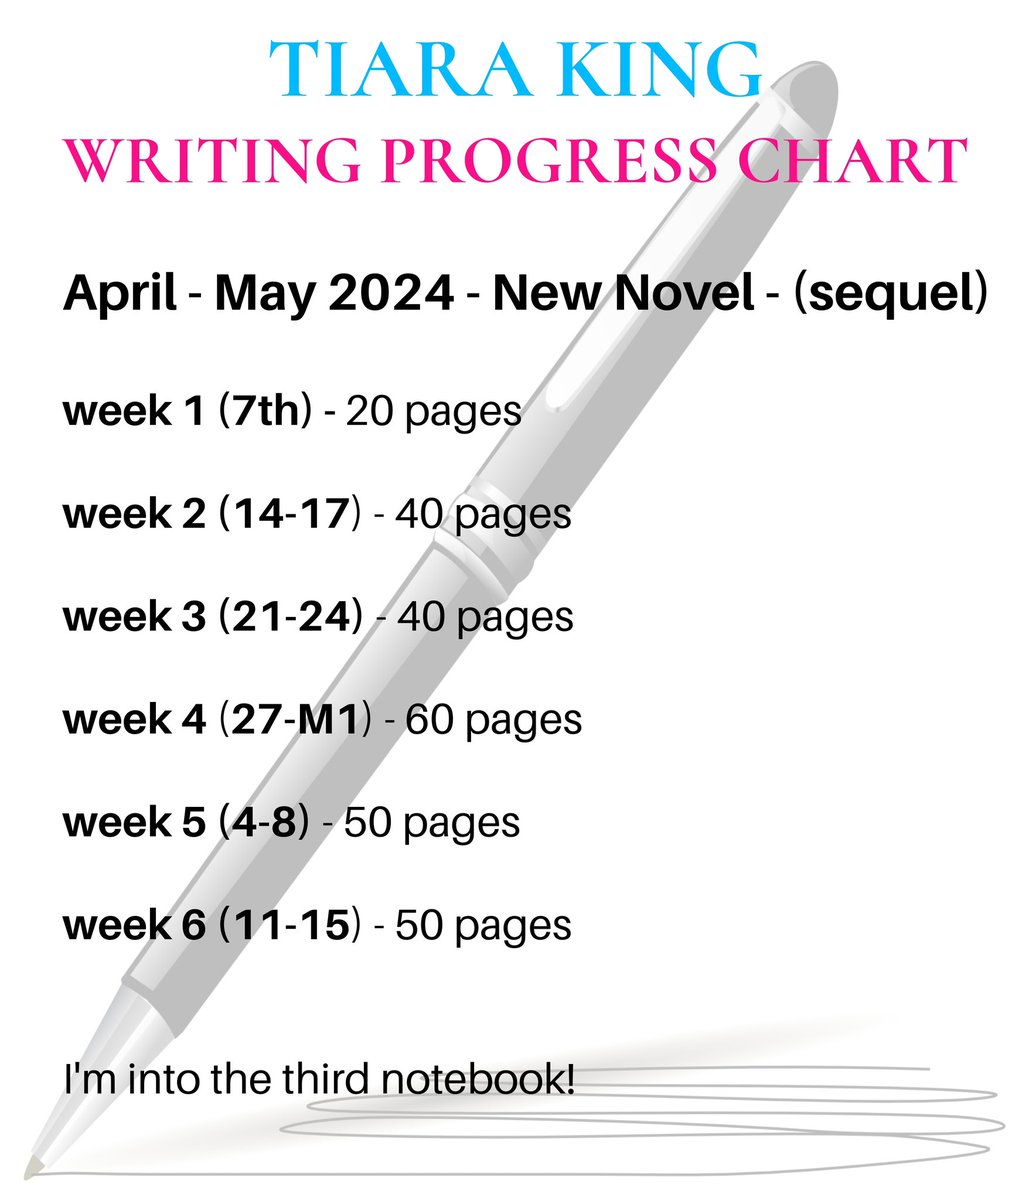 AUTHOR BTS: Here is my writing progress for the week on the new novel.
.
#tiarakinghq #writing #author #authorlife #authorsofinstagram #authorsofig #authorcommunity #writer #writerslife #writersofig #writerscommunity #writersofinstagram #bts #behindthescenes